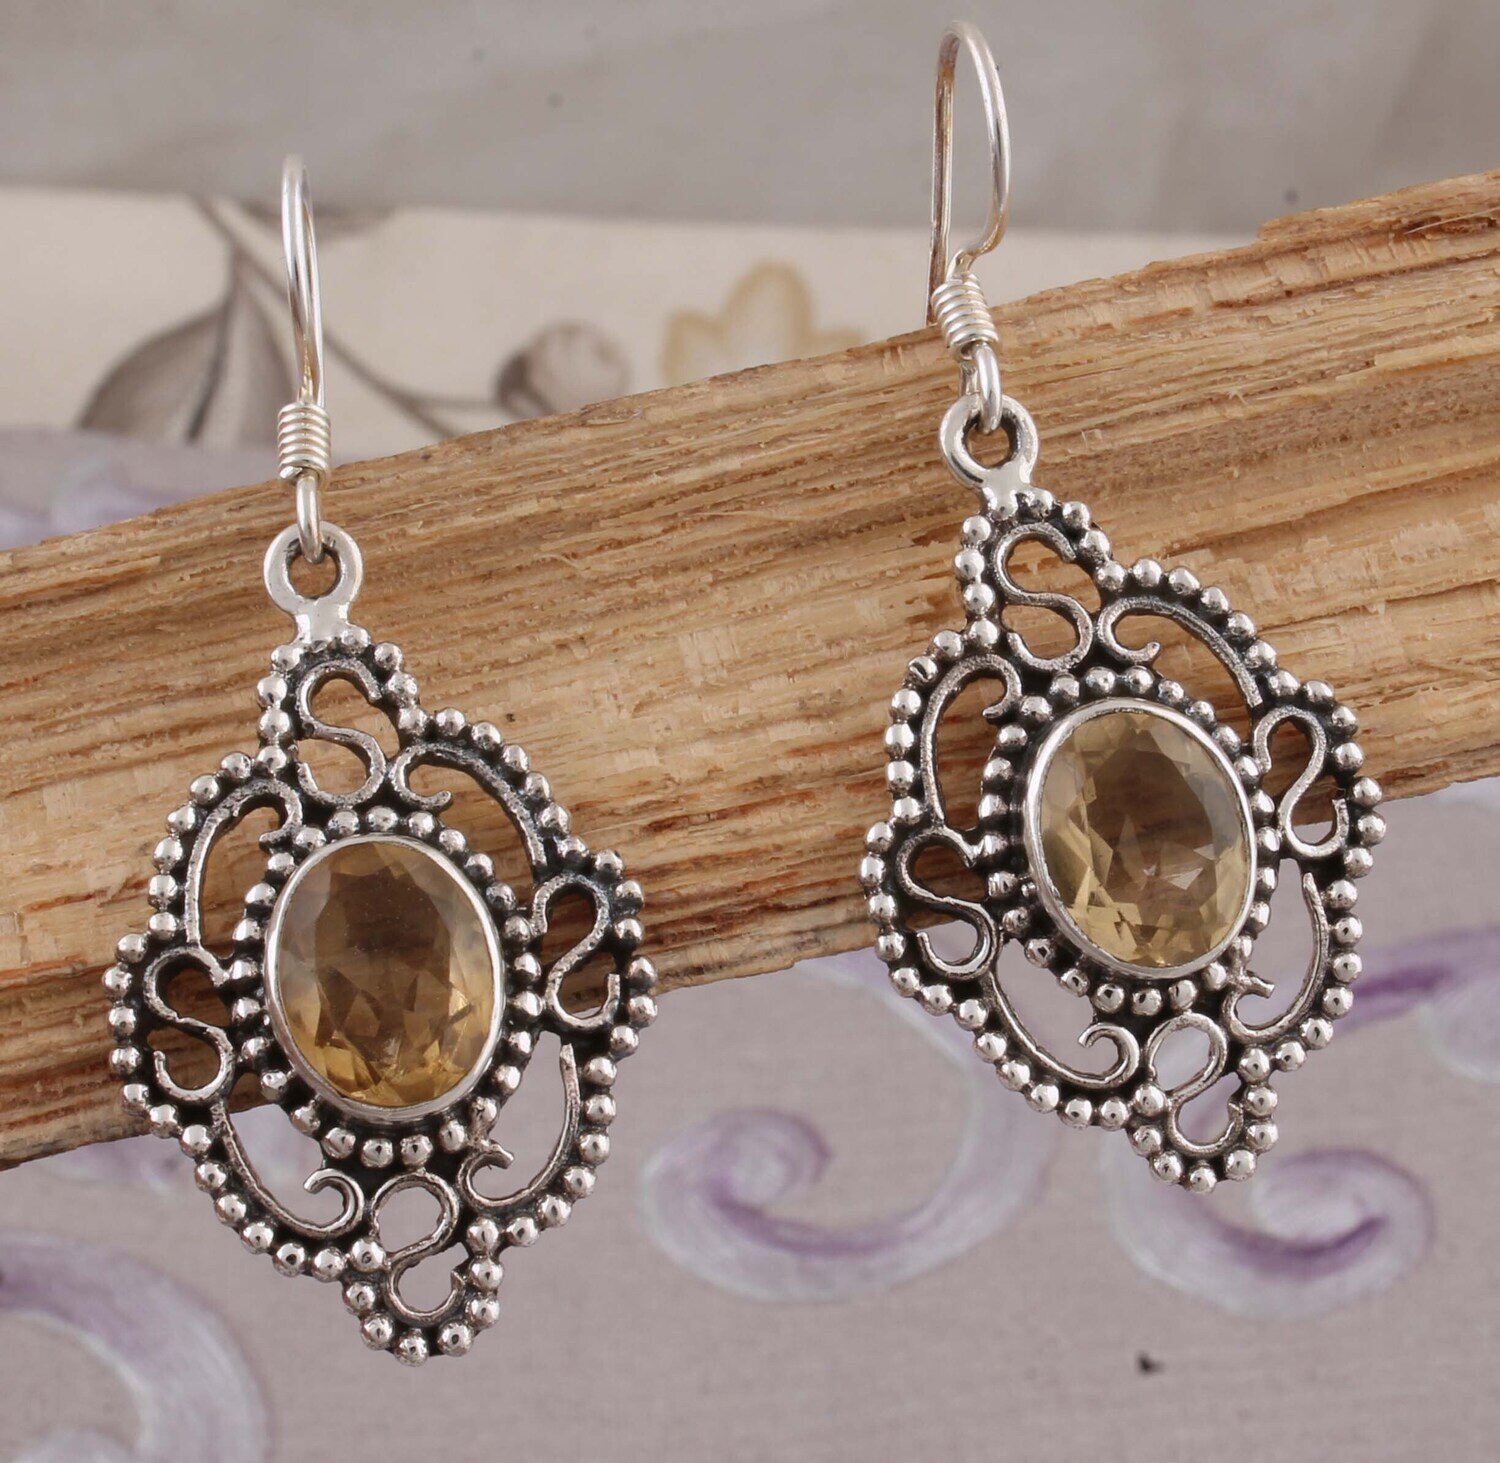 Amazing Citrine Top Quality Gemstone Earring 925-Sterling Silver Earring,Antique Silver Earring,Wedding Beautiful Earring Gift For Her